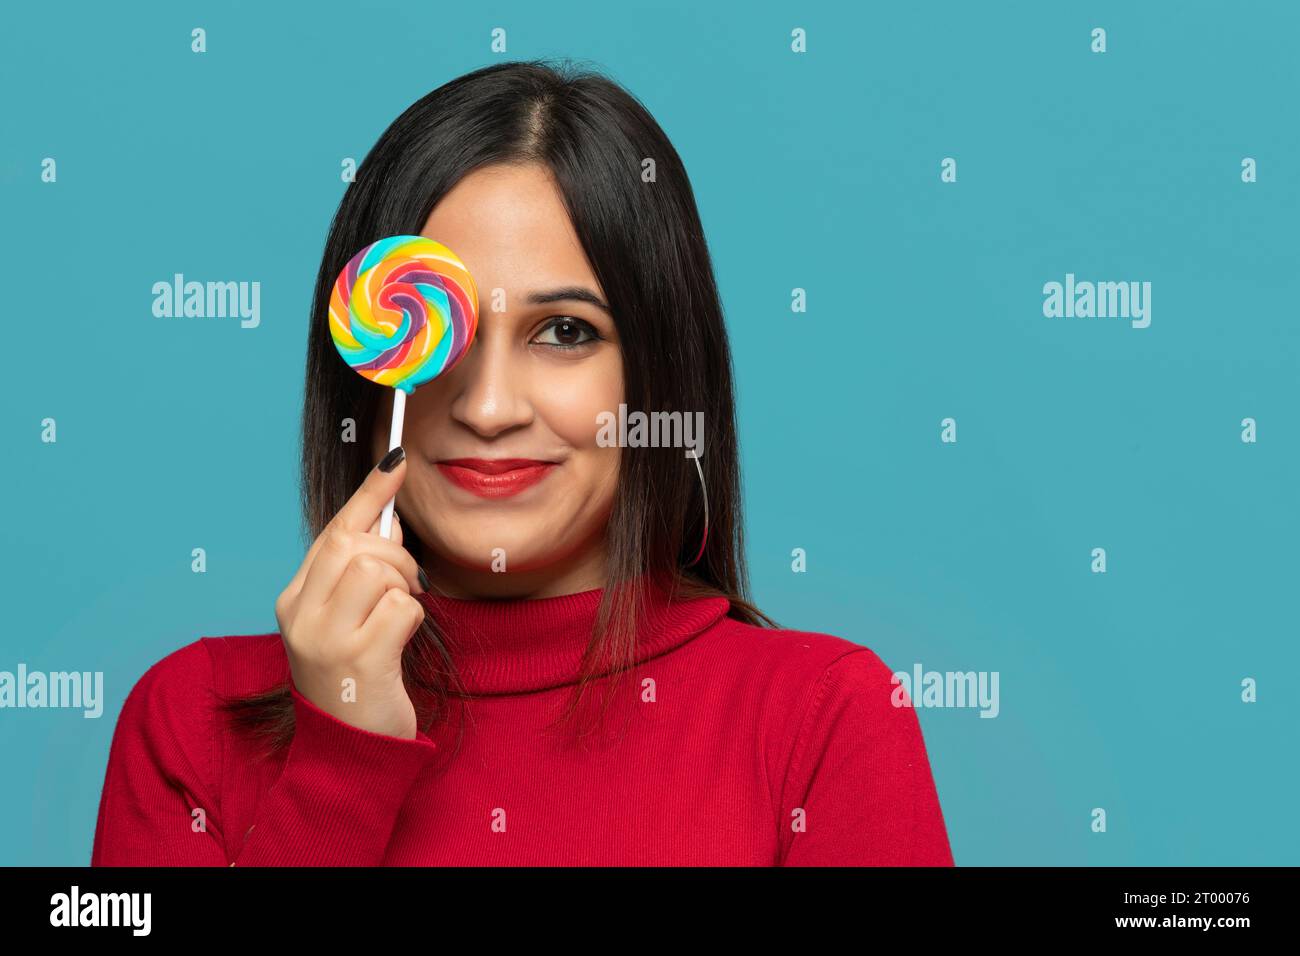 young woman covering eye with lollipop and smiling Stock Photo